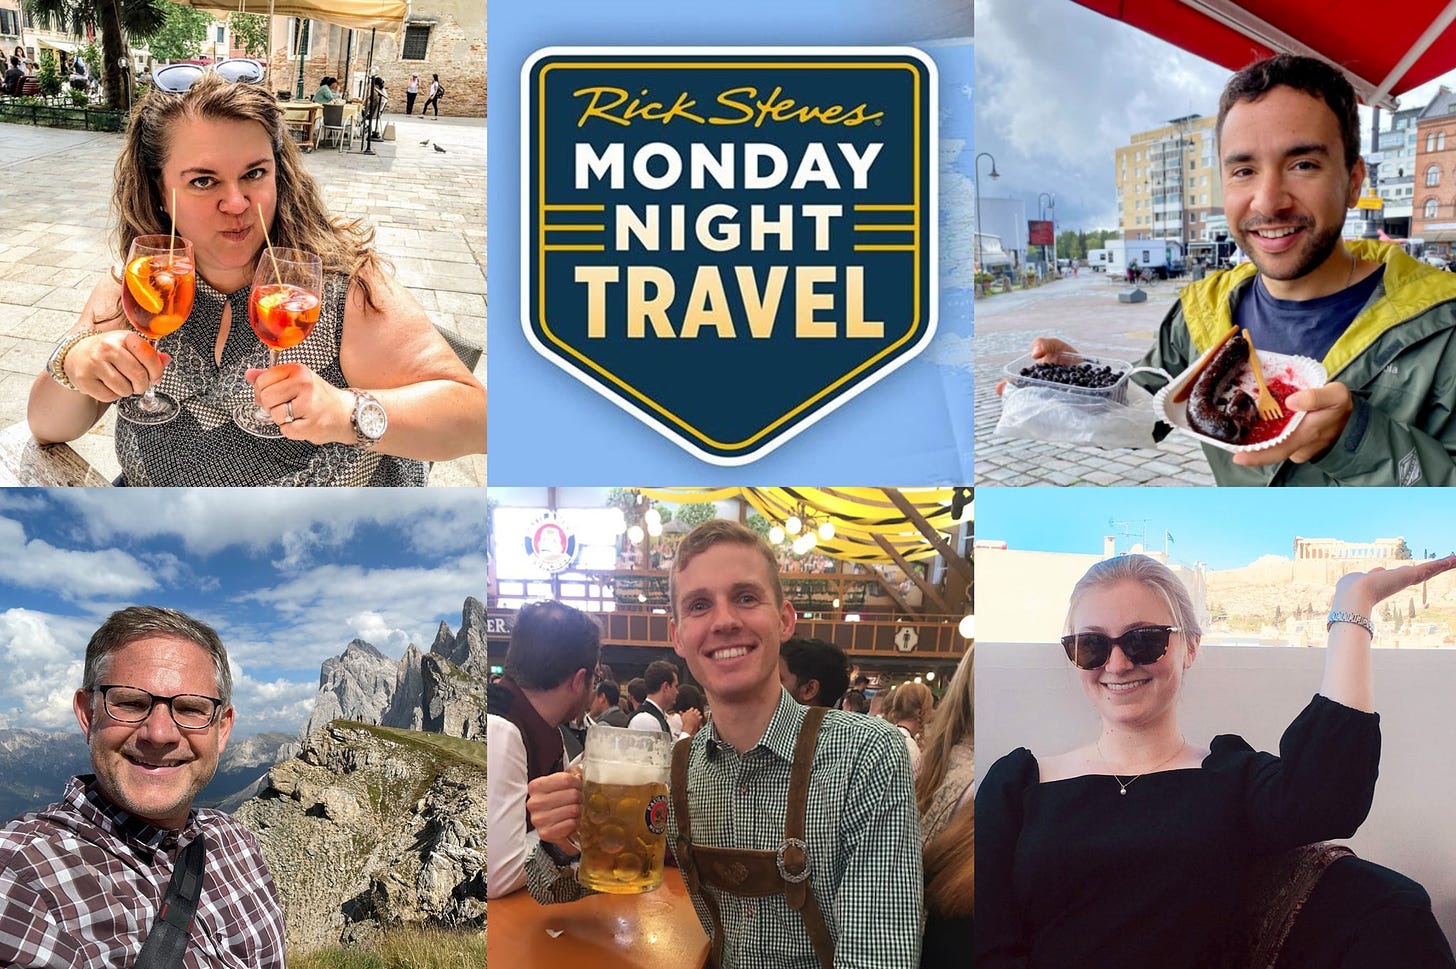 A photo collage of Cameron Hewitt and the Monday Night Travel dream team: Lisa Friend with two glasses of Aperol Spritz, Ben Green with street food in Finland, Cameron Hewitt in the Dolomites, Gabe Gunnink at Oktoberfest in Munich, and Julianne Wurden in front of the  Acropolis in Athens.